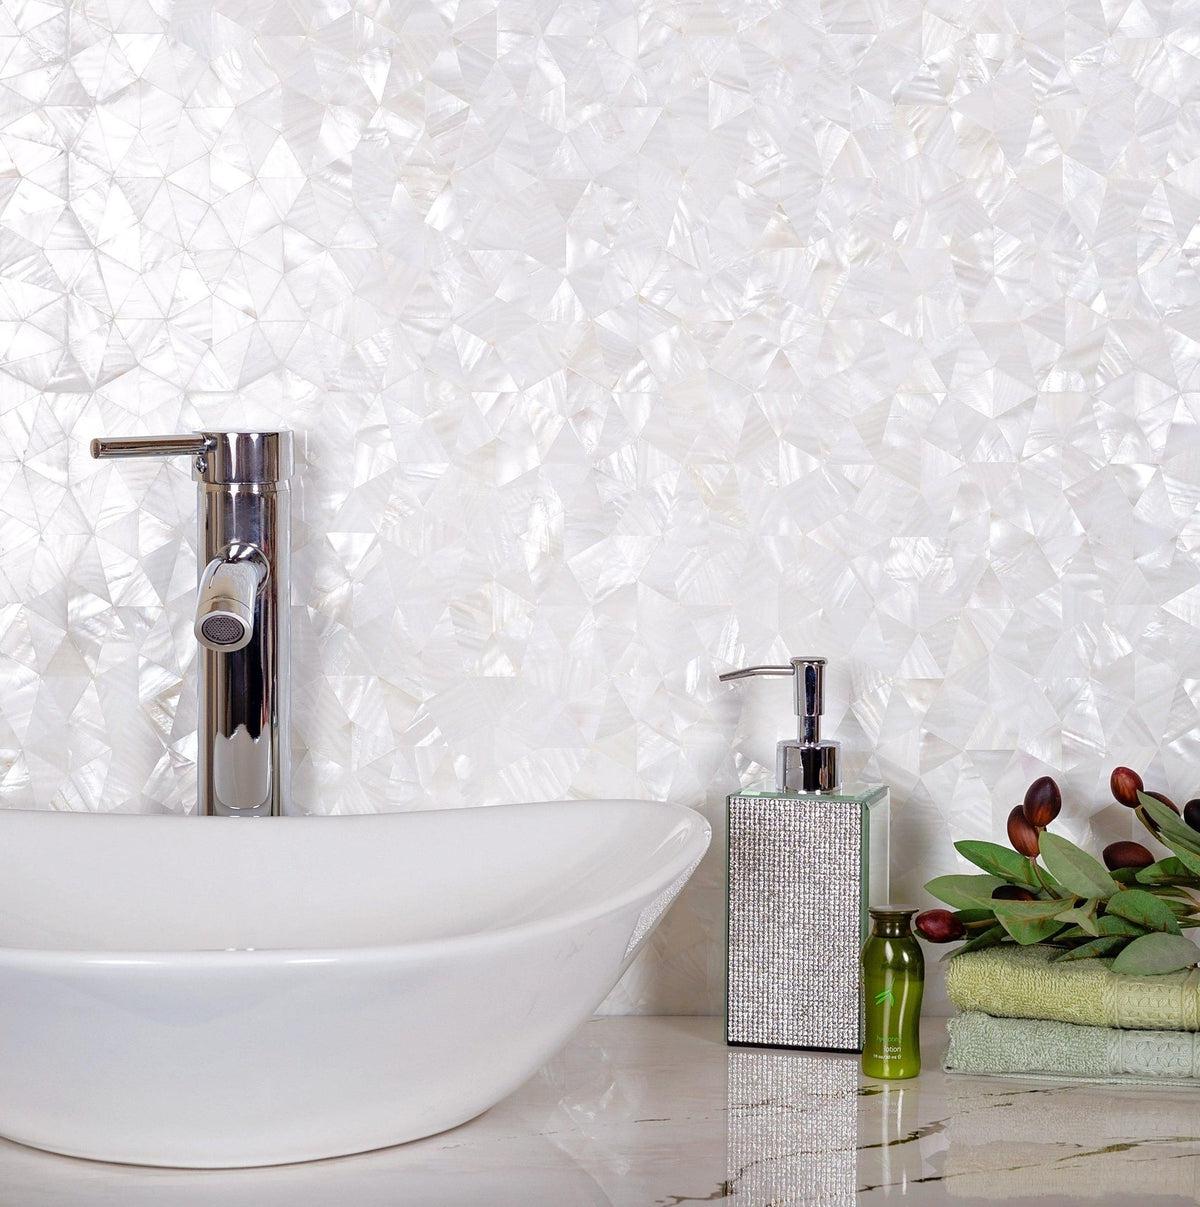 Mother of Pearl Mosaic Tile|Tile Club